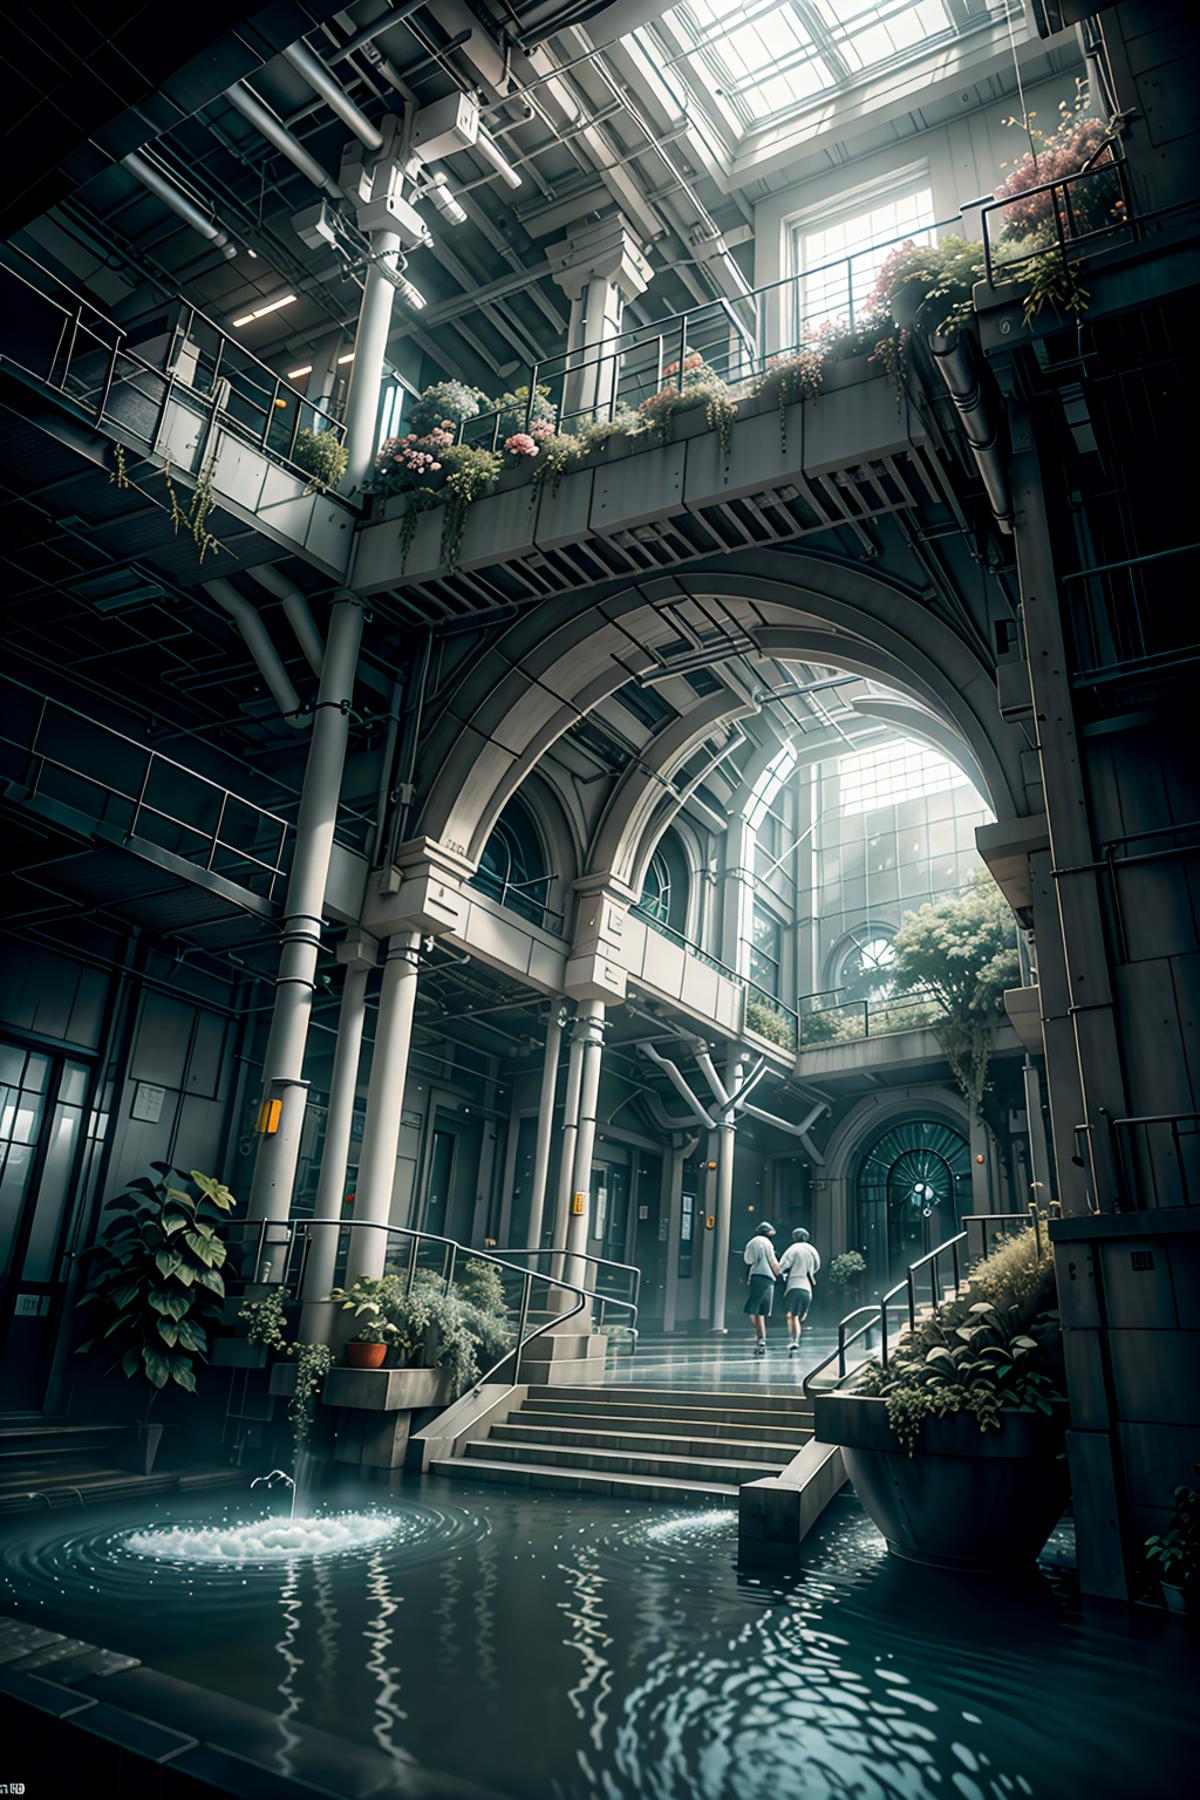 A 3D artwork of a large building with a balcony, statues, and a staircase.